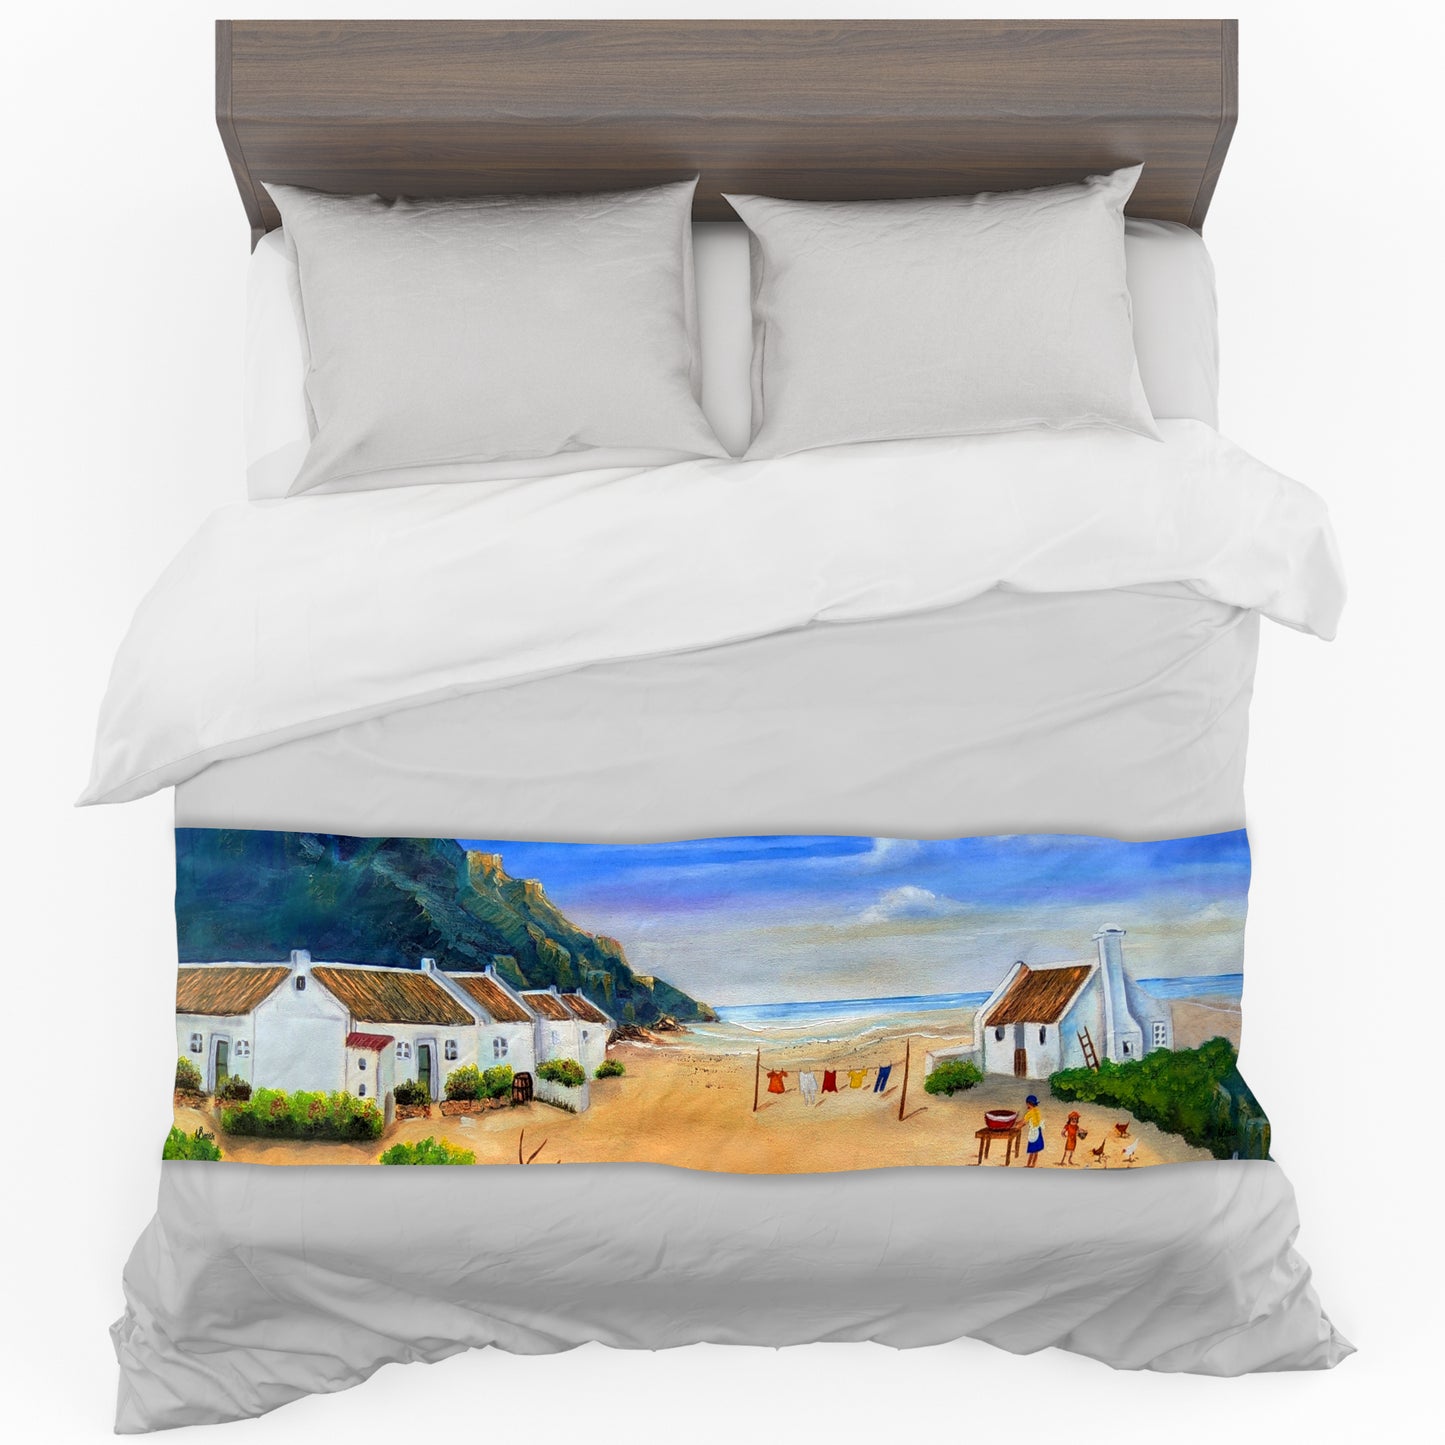 Boat View West Coast By Yolande Smith Bed Runner and Optional Pillowcases